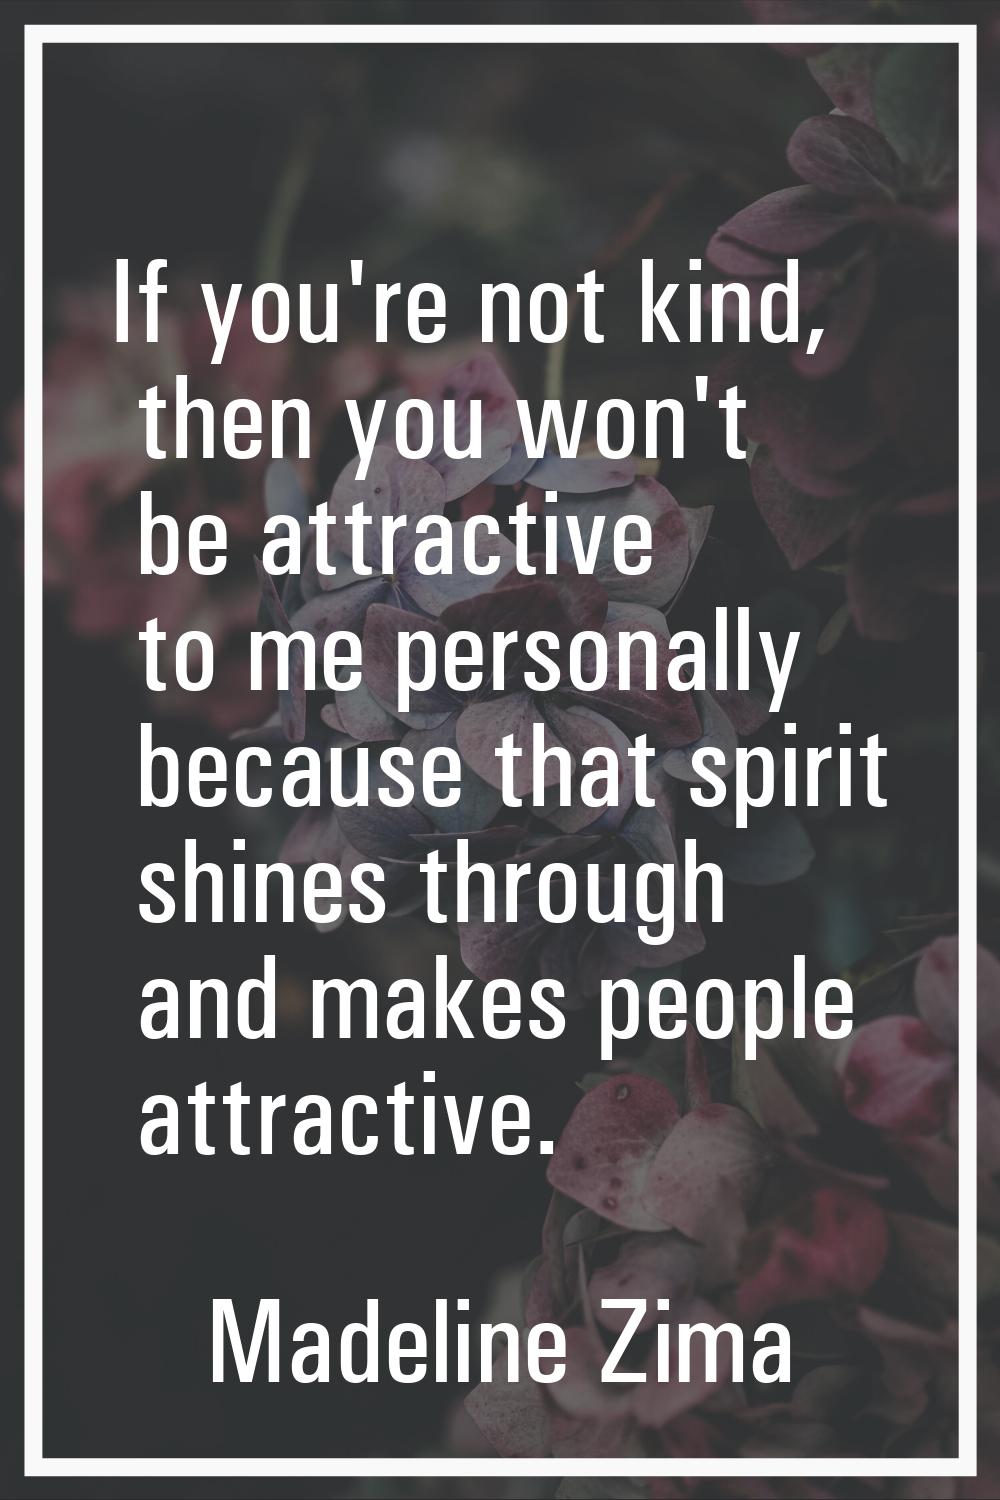 If you're not kind, then you won't be attractive to me personally because that spirit shines throug